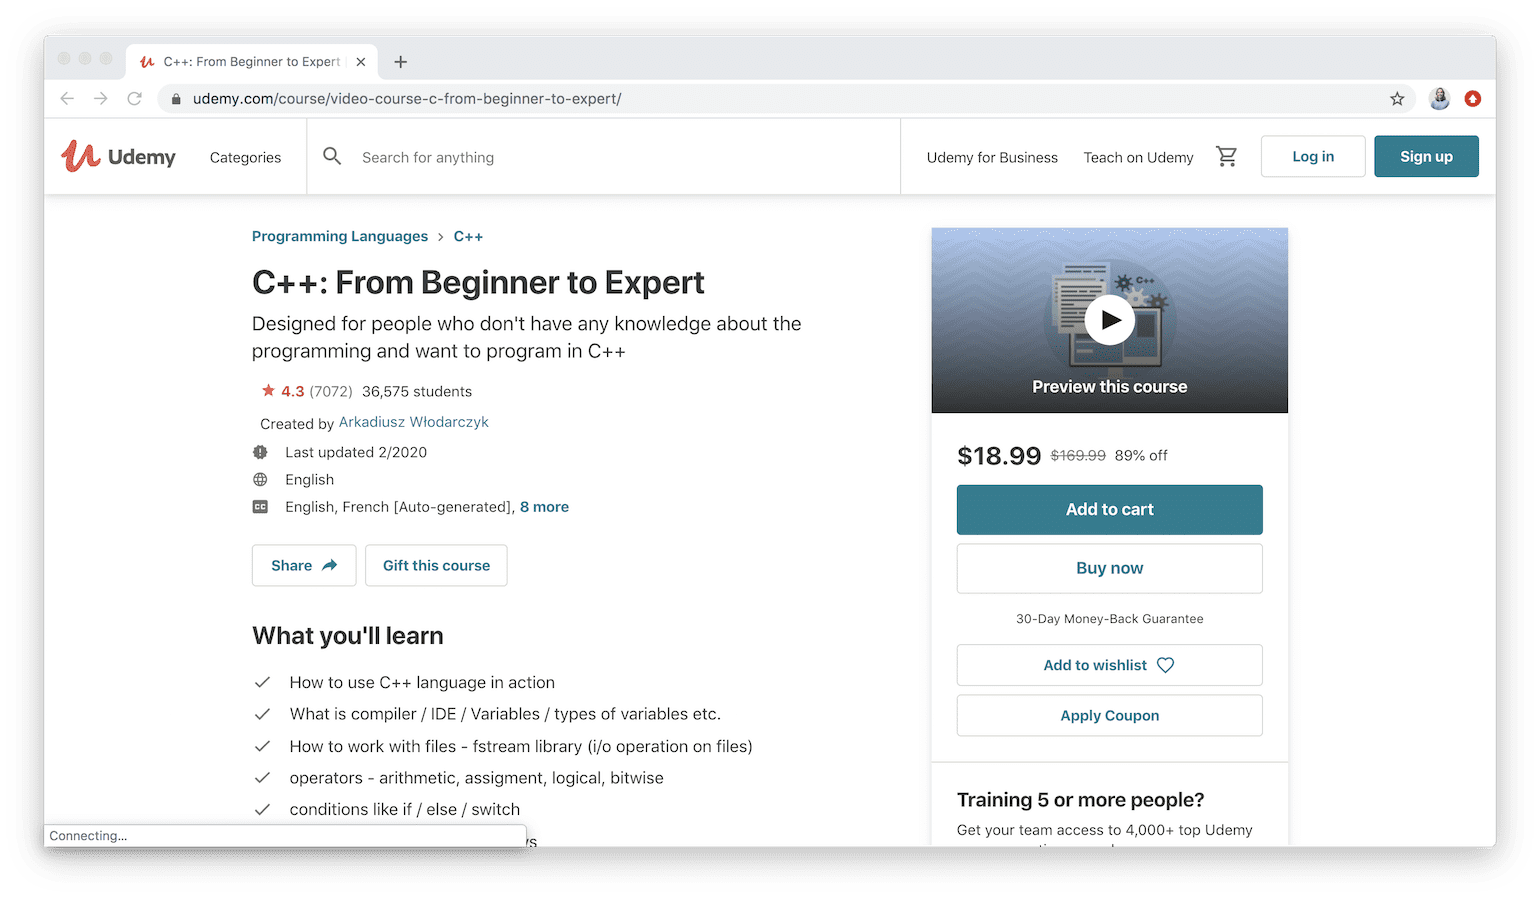 C++: From Beginner to Expert on Udemy